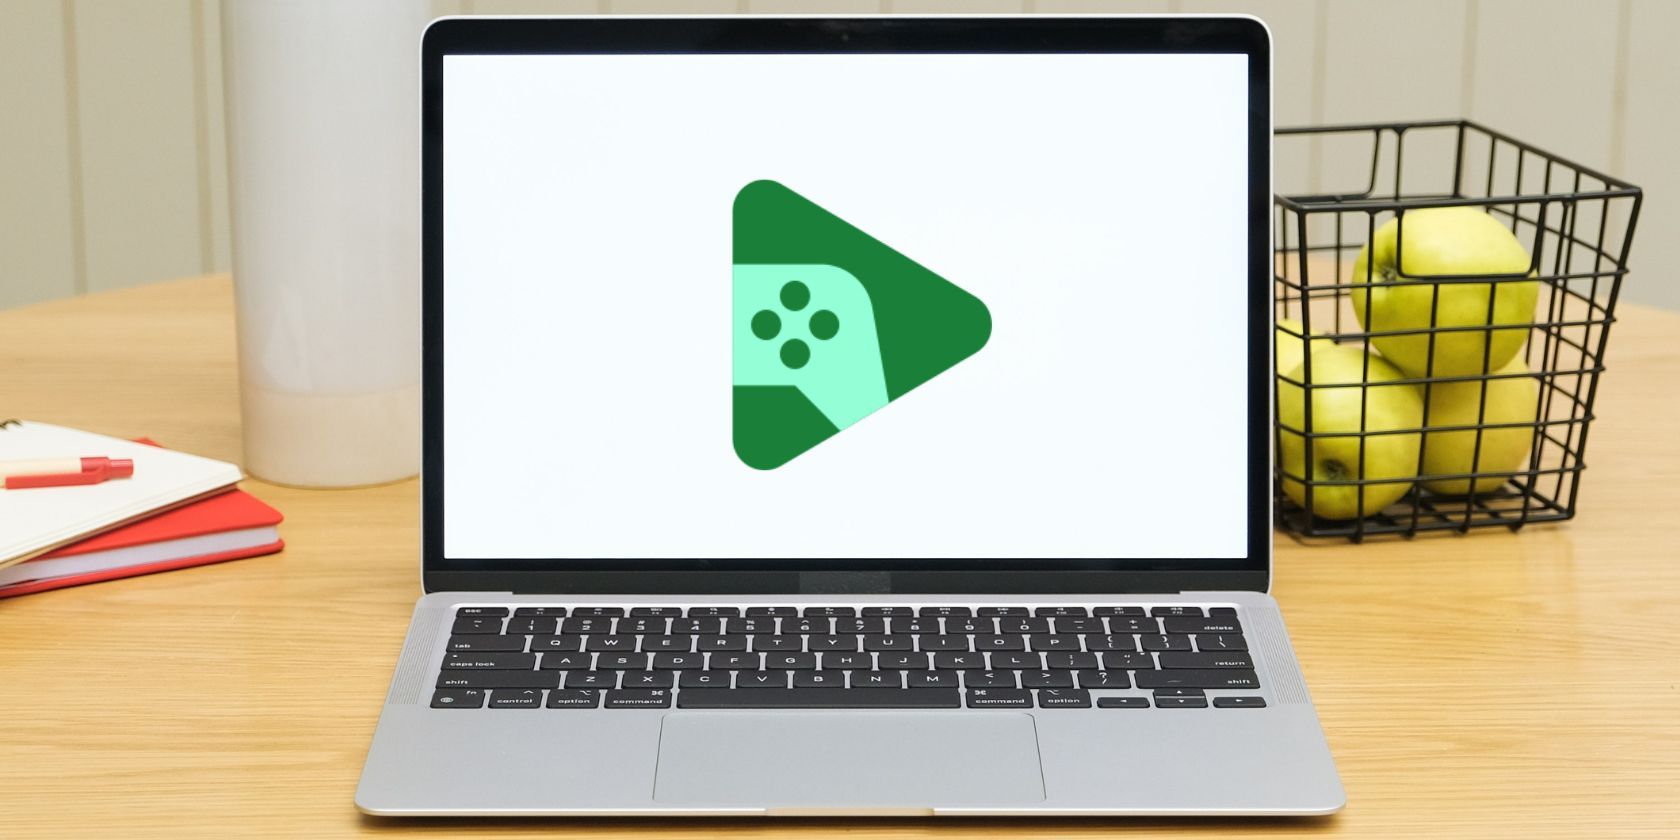 How to play Android games on Windows 11 - Pureinfotech